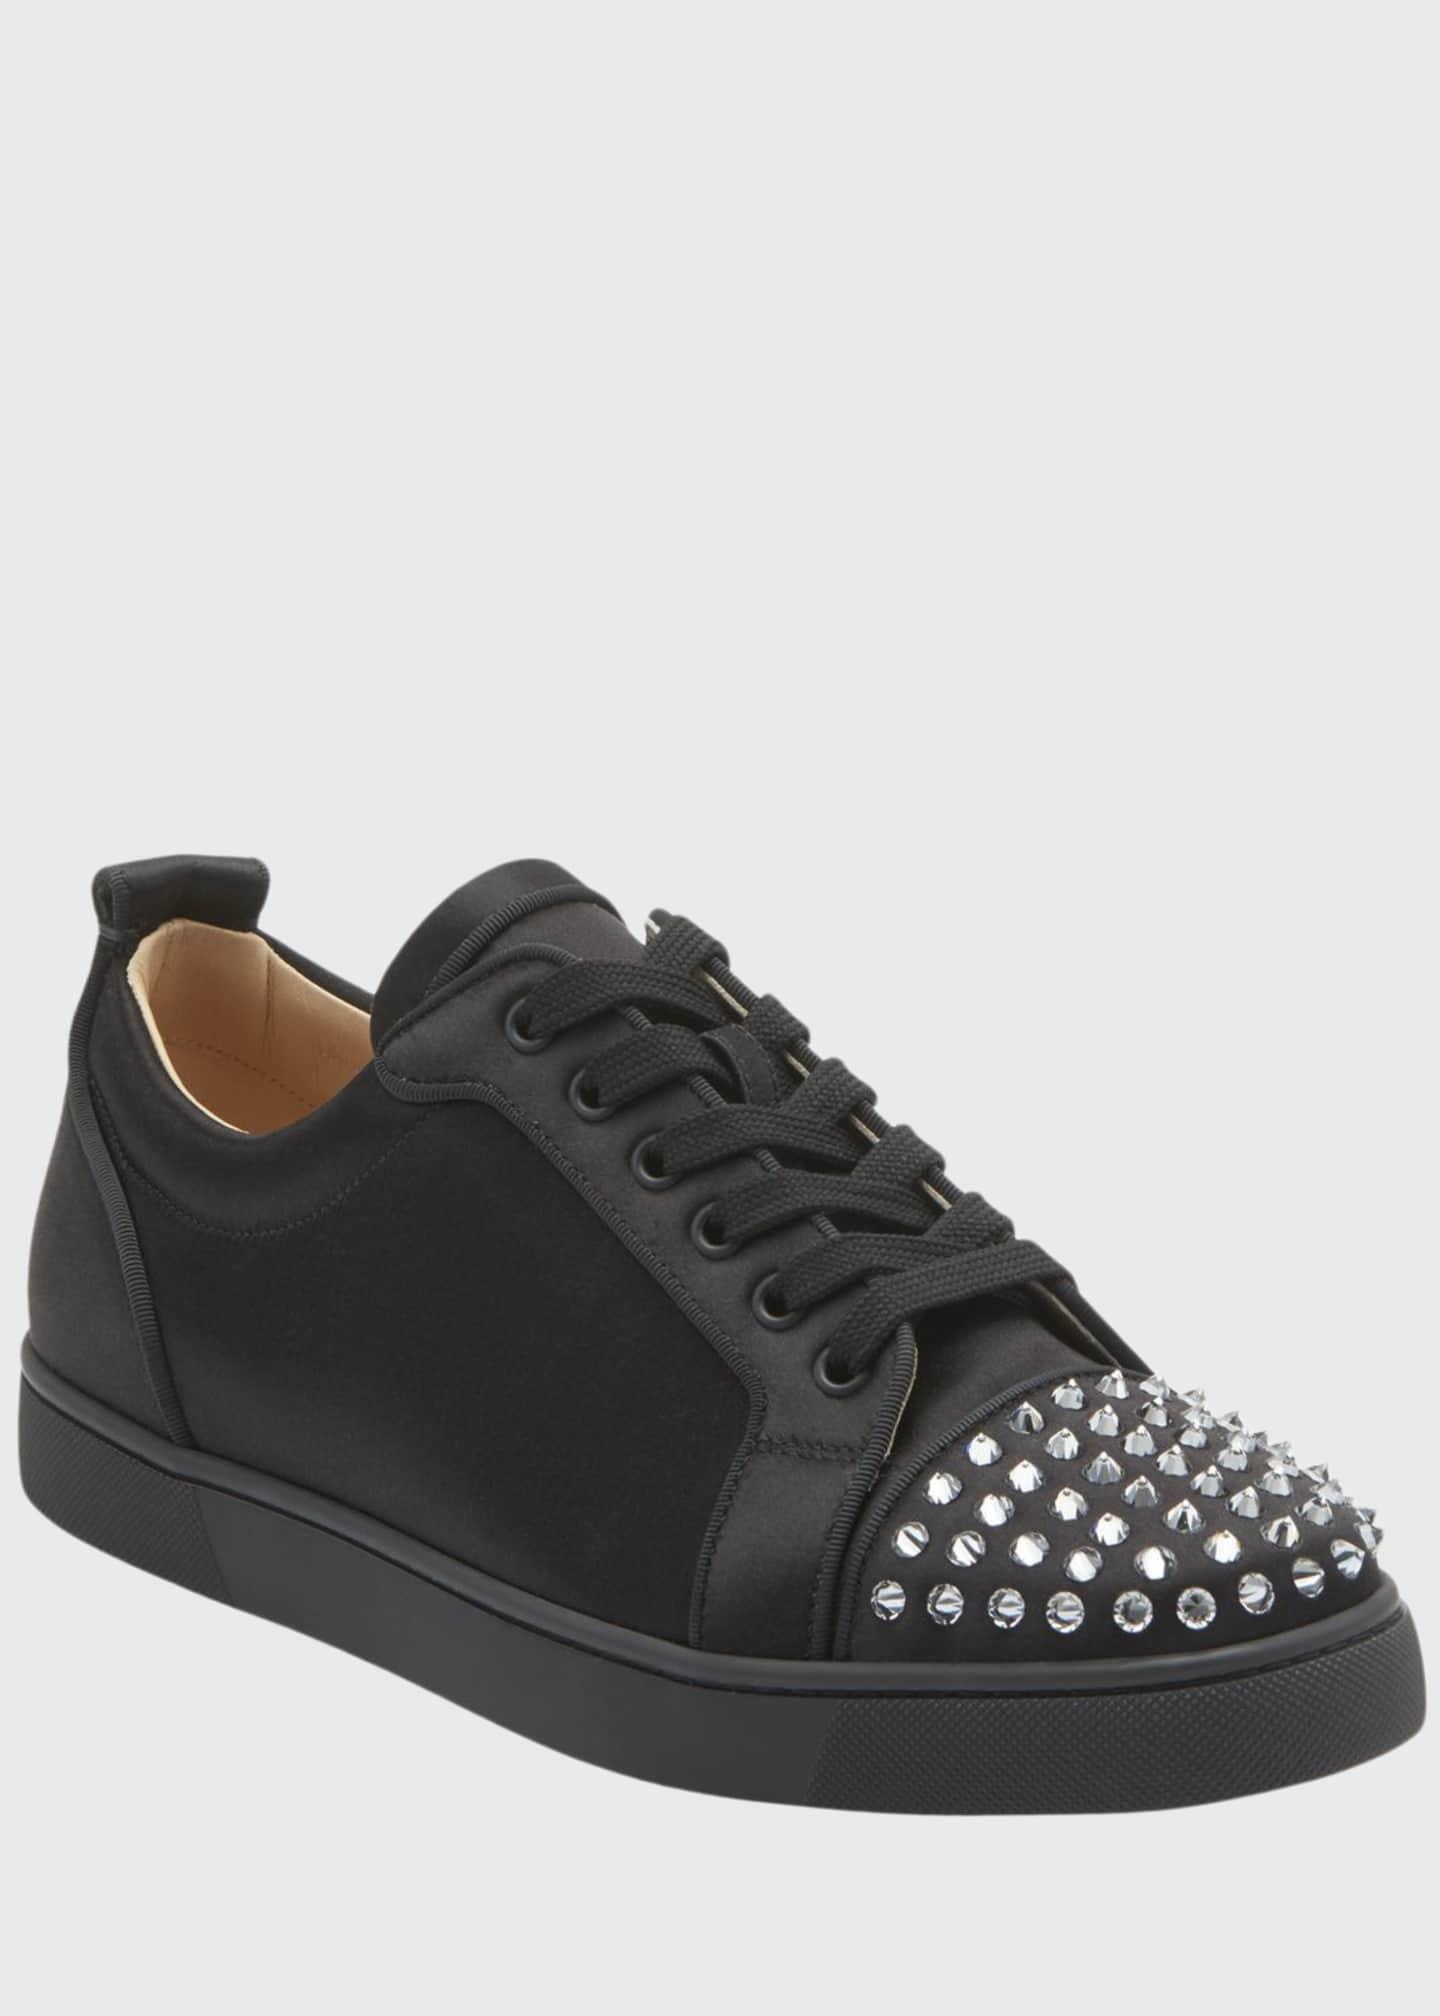 Christian Louboutin Leather Men's Louis Junior Spikes Red Sole Sneakers ...